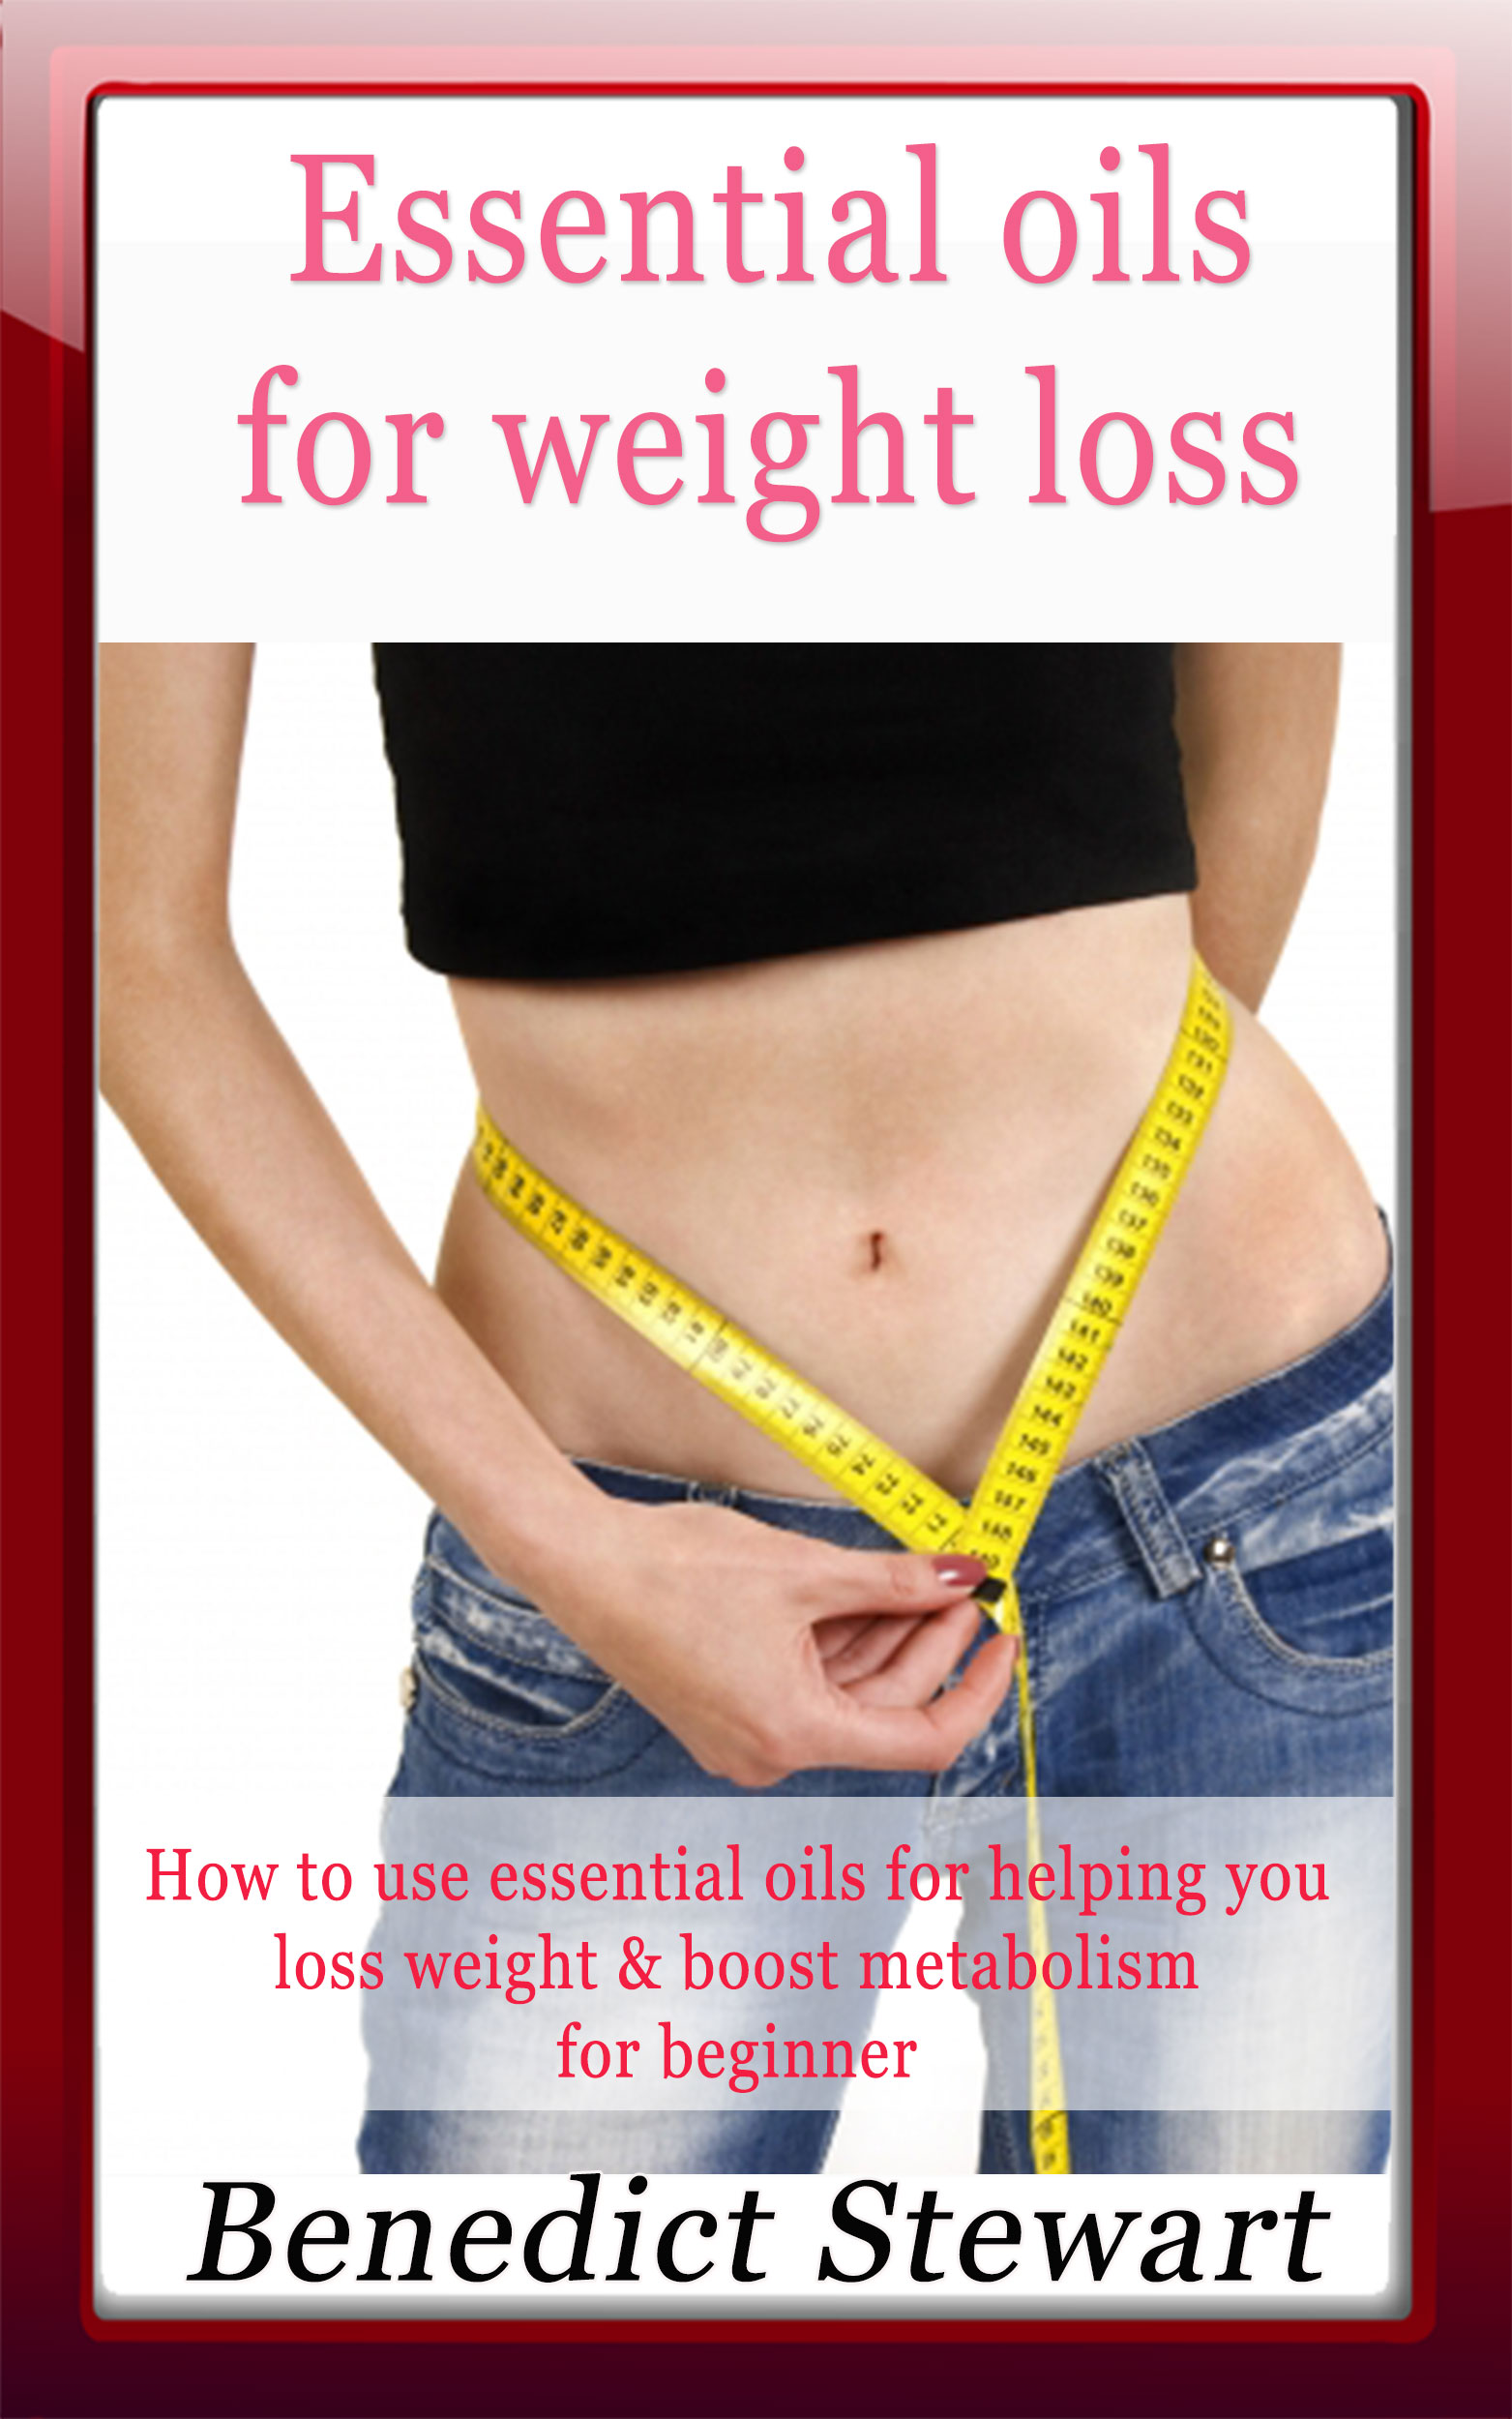 Essential Oils For Weight Loss An Ebook By Benedict Stewart